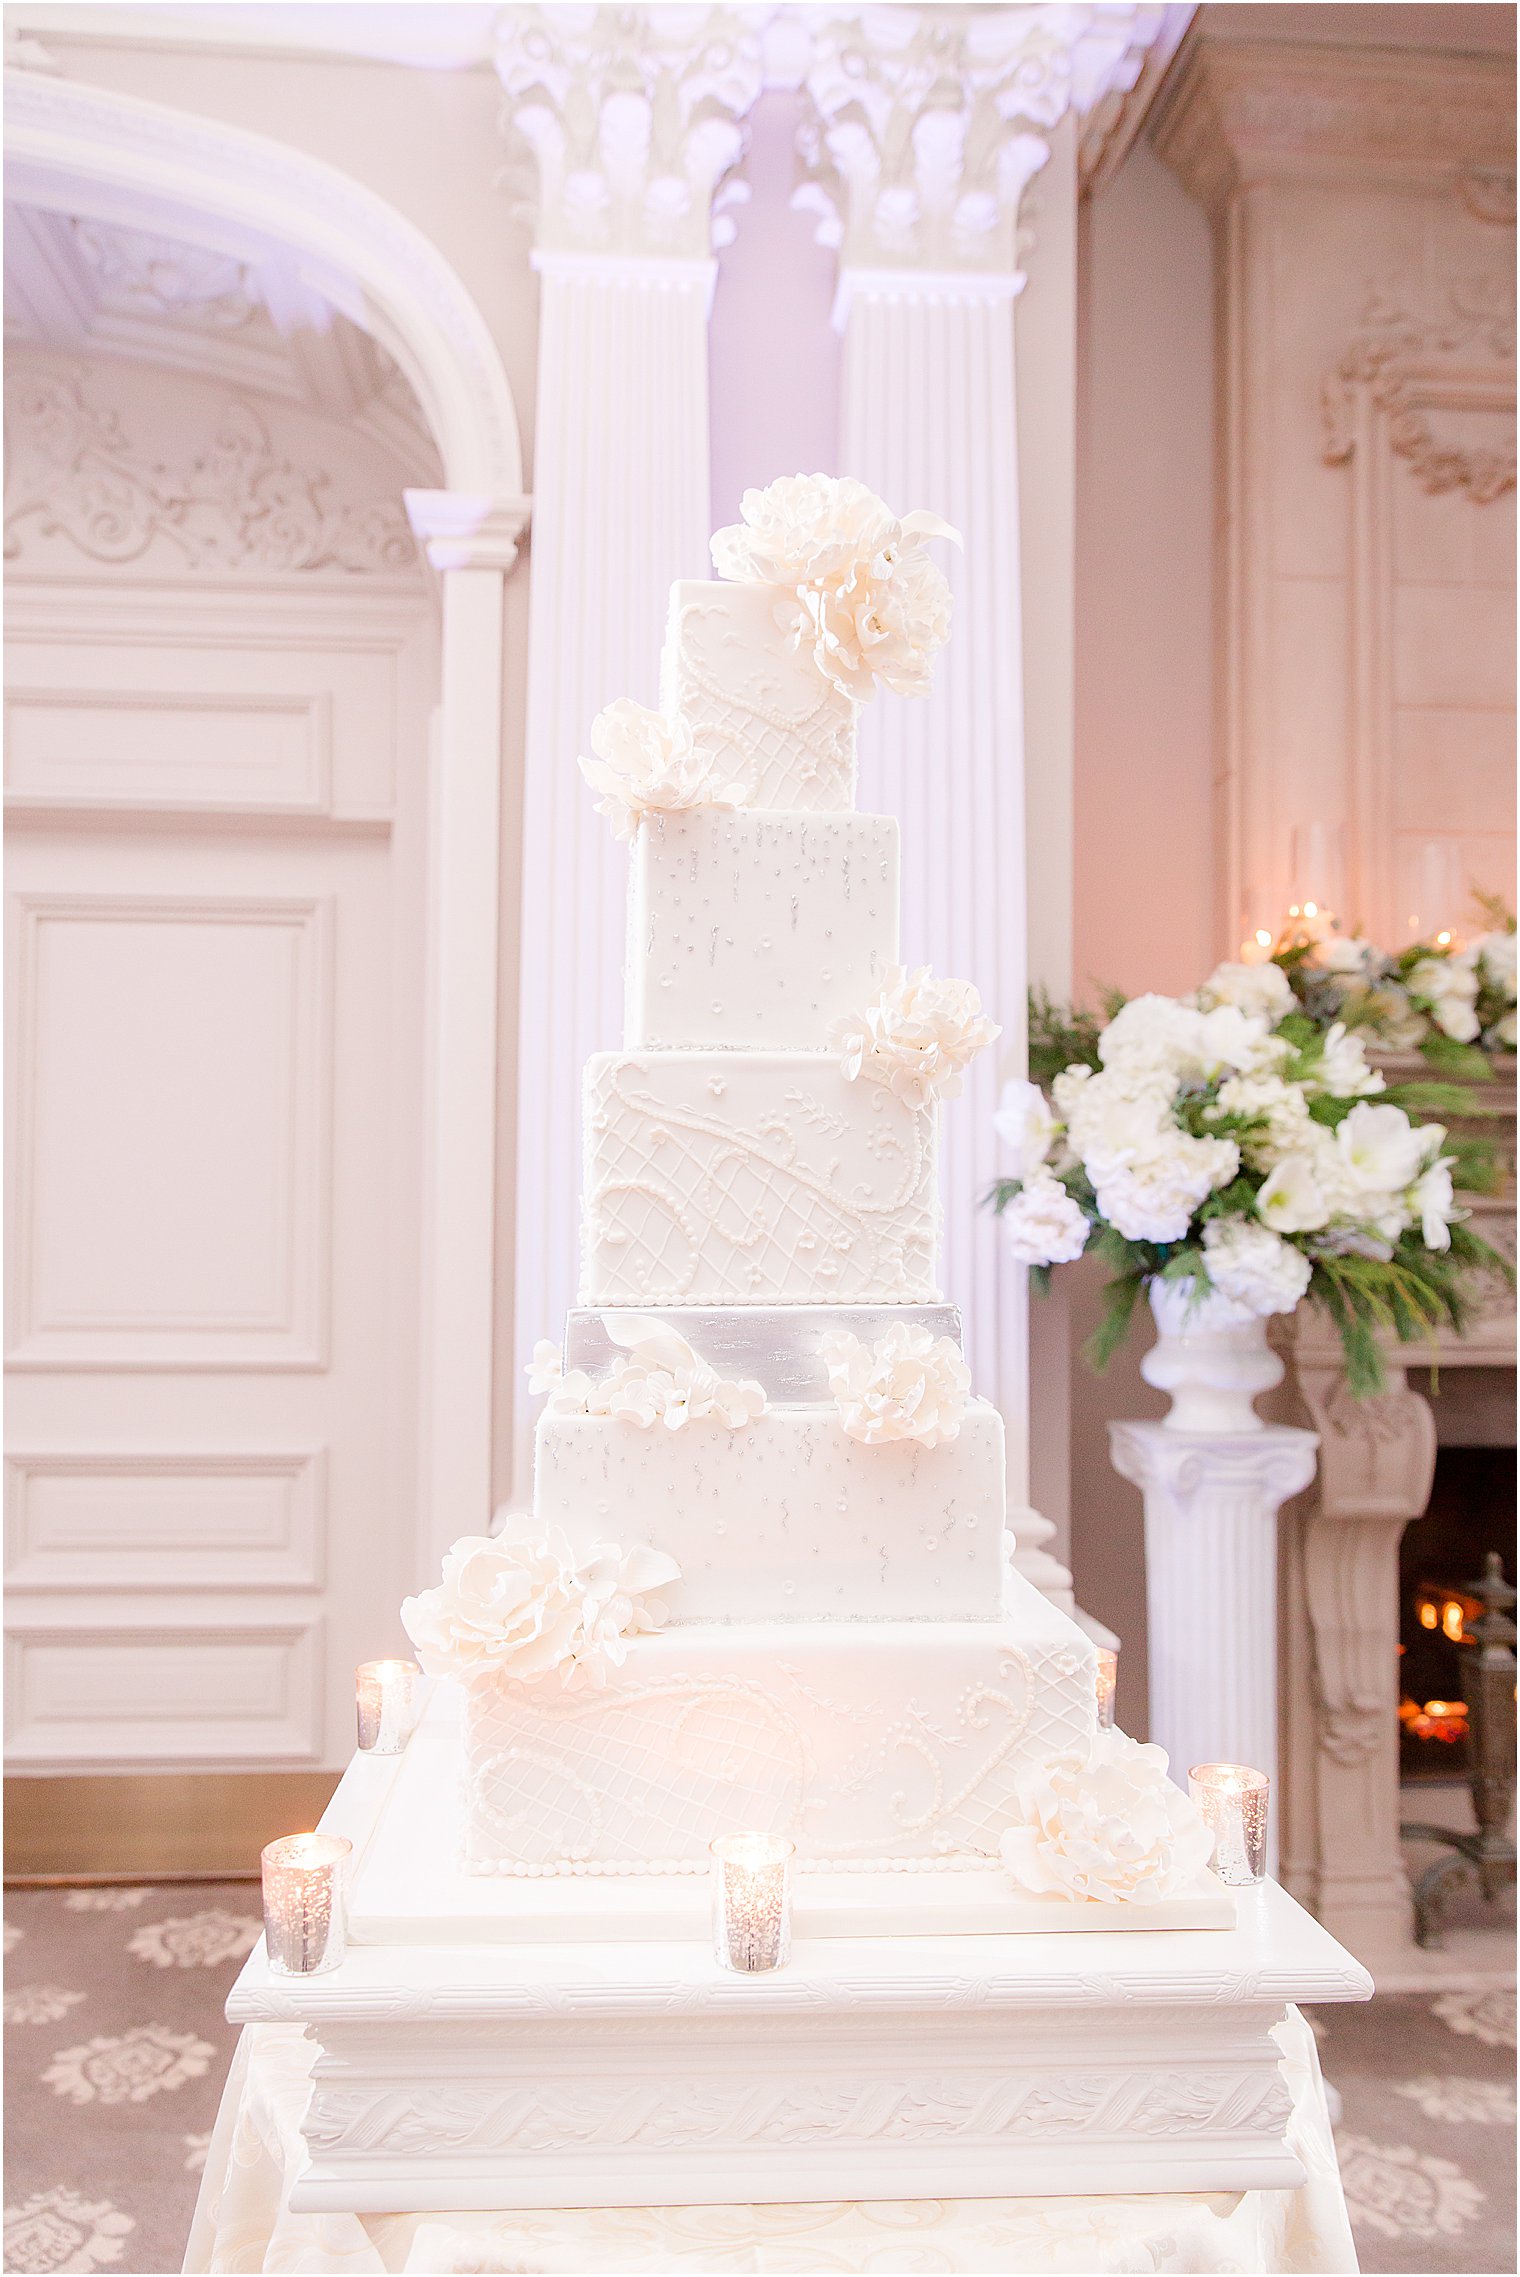 elegant wedding cake with intricate sugar work from My Daughter's Cakes